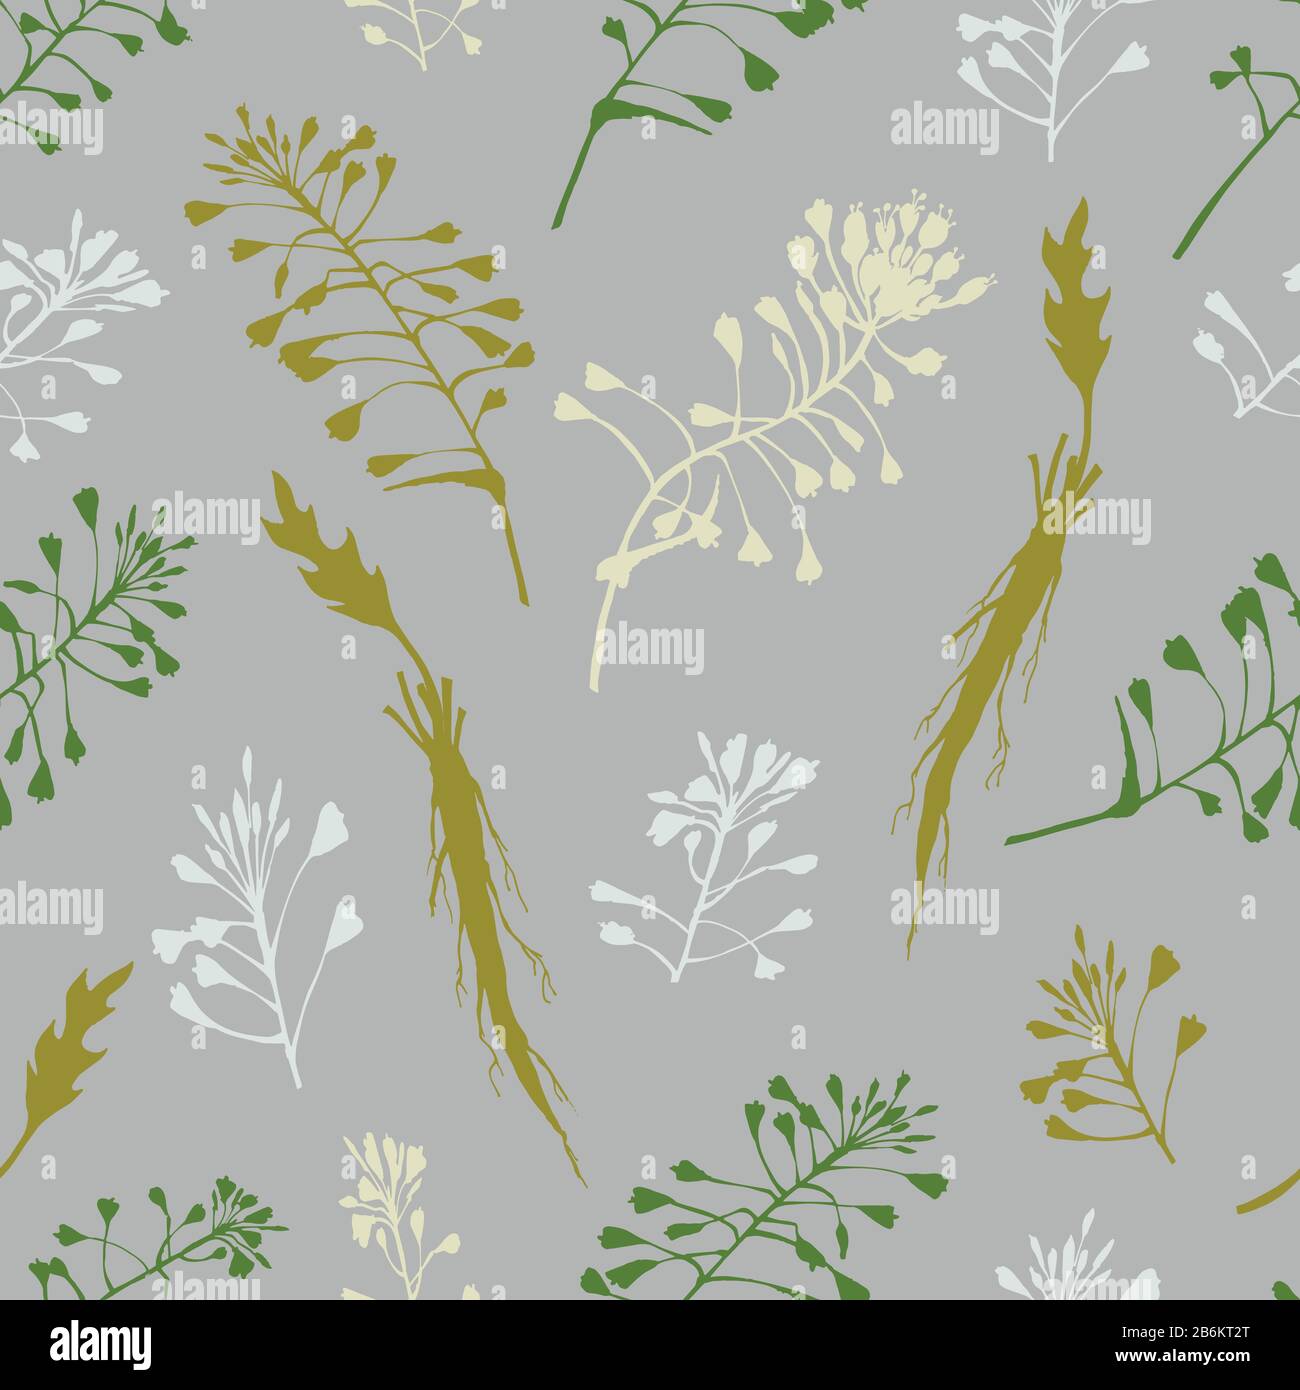 Seamless pattern with color hand drawn silhouette of Shepherds Purse, lives and flowers isolated on gray background. Retro vintage graphic design Stock Vector